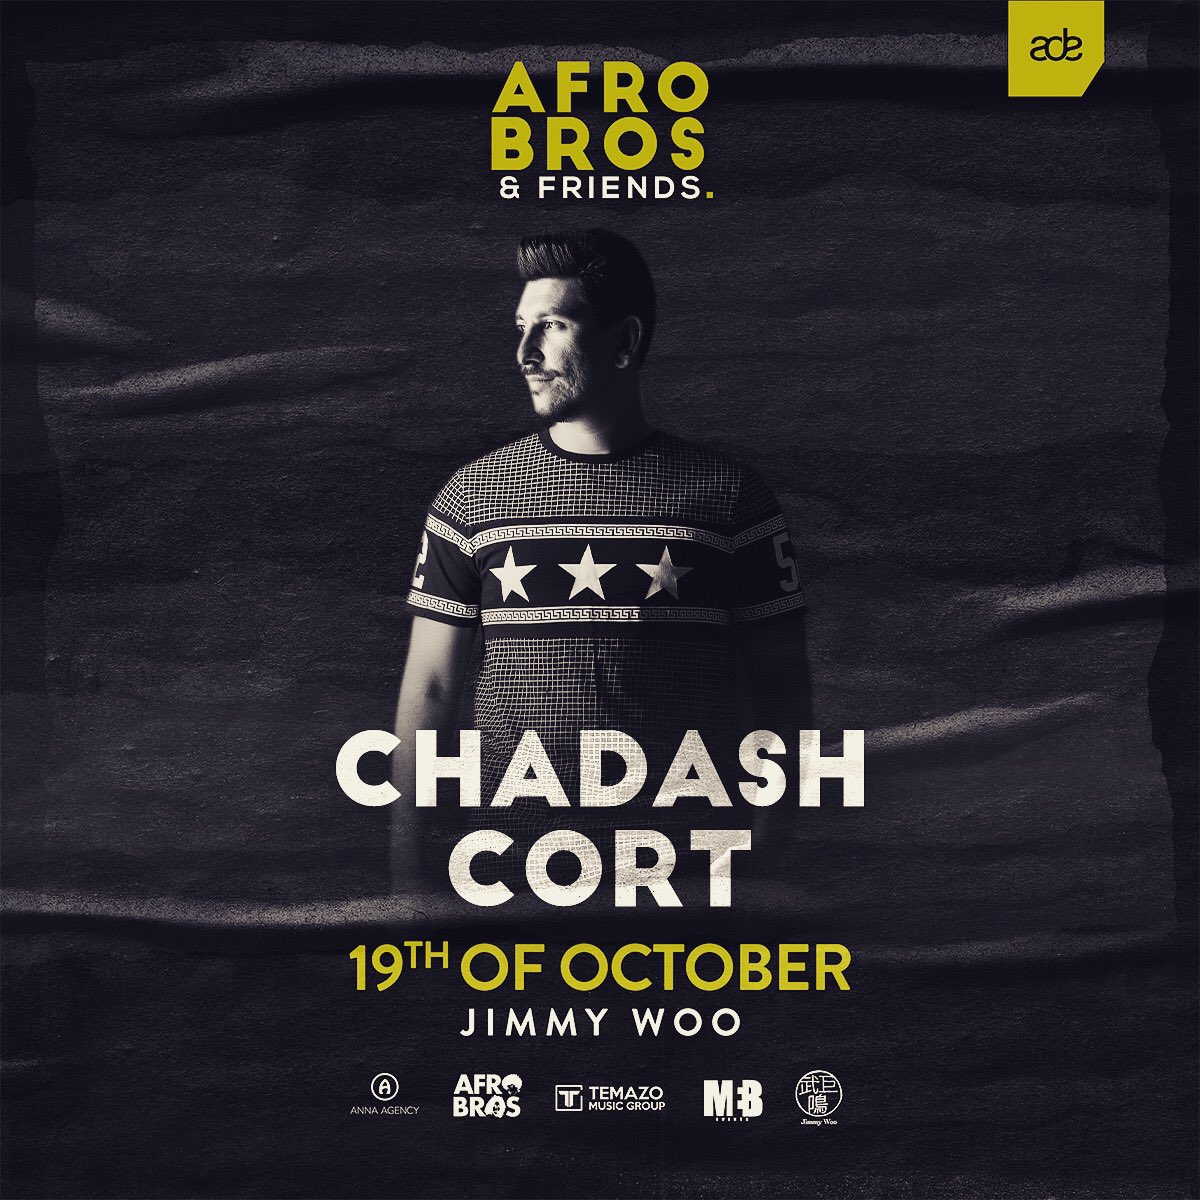 Amsterdam #ade with @AFROBROS